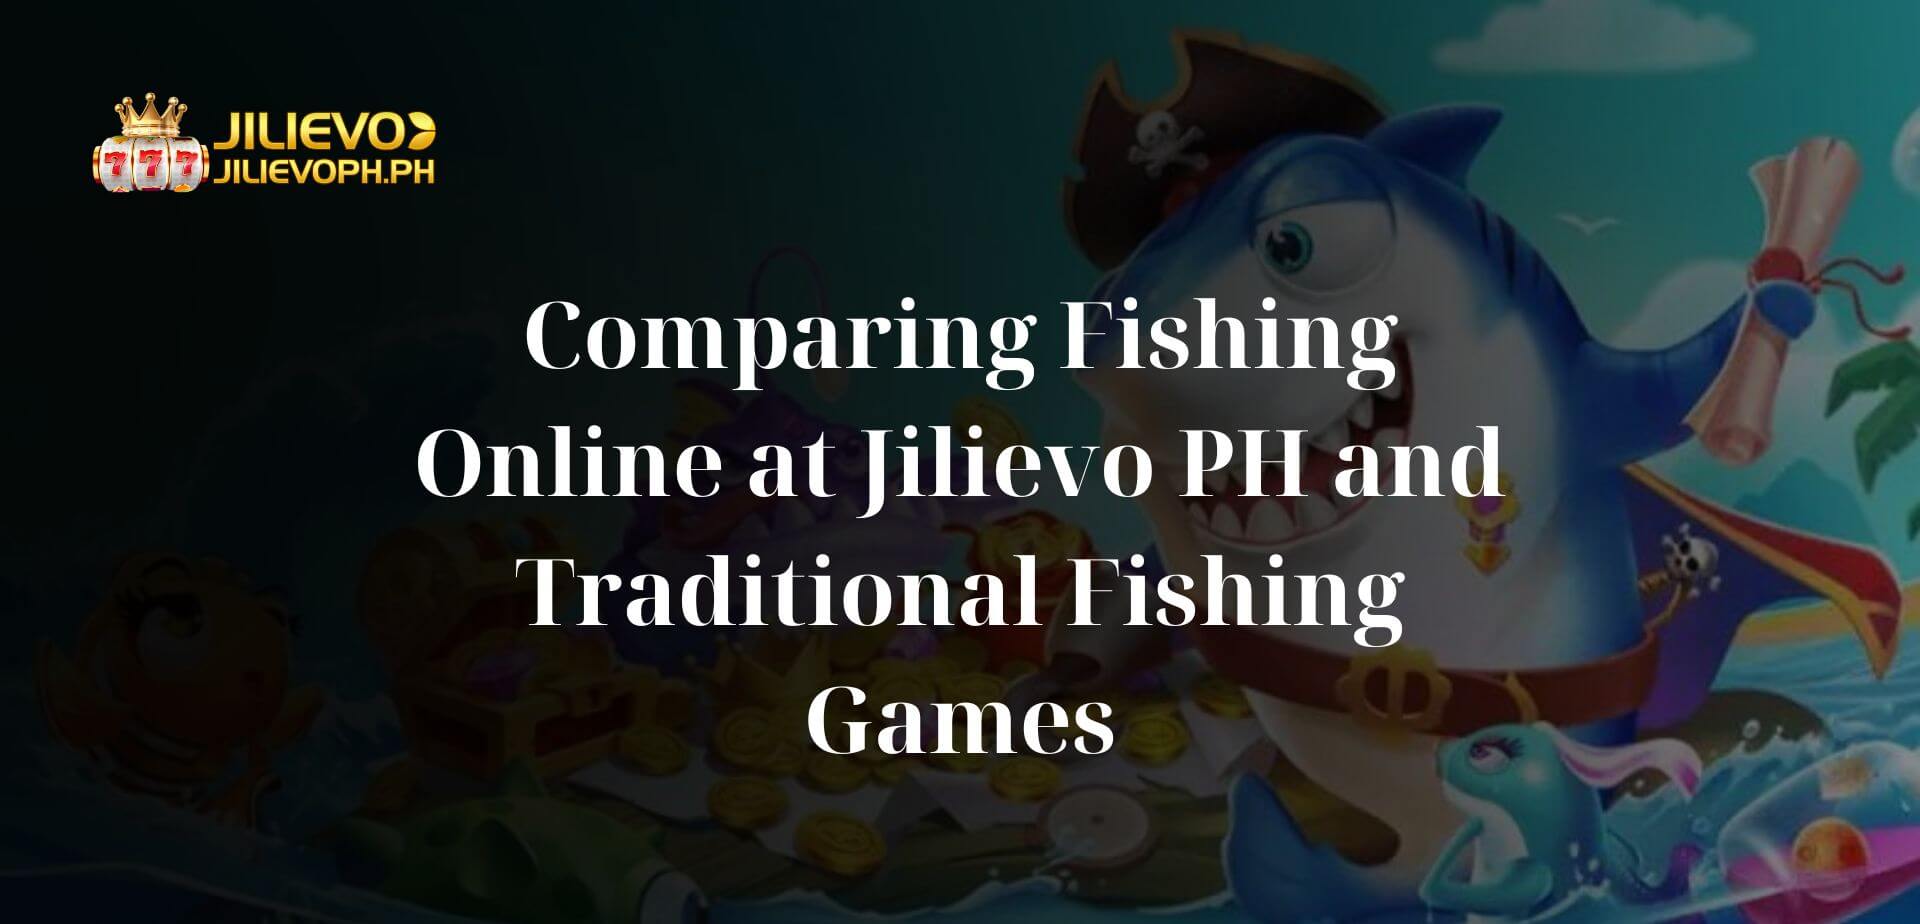 Comparing Fishing Online at Jilievo PH and Traditional Fishing Games